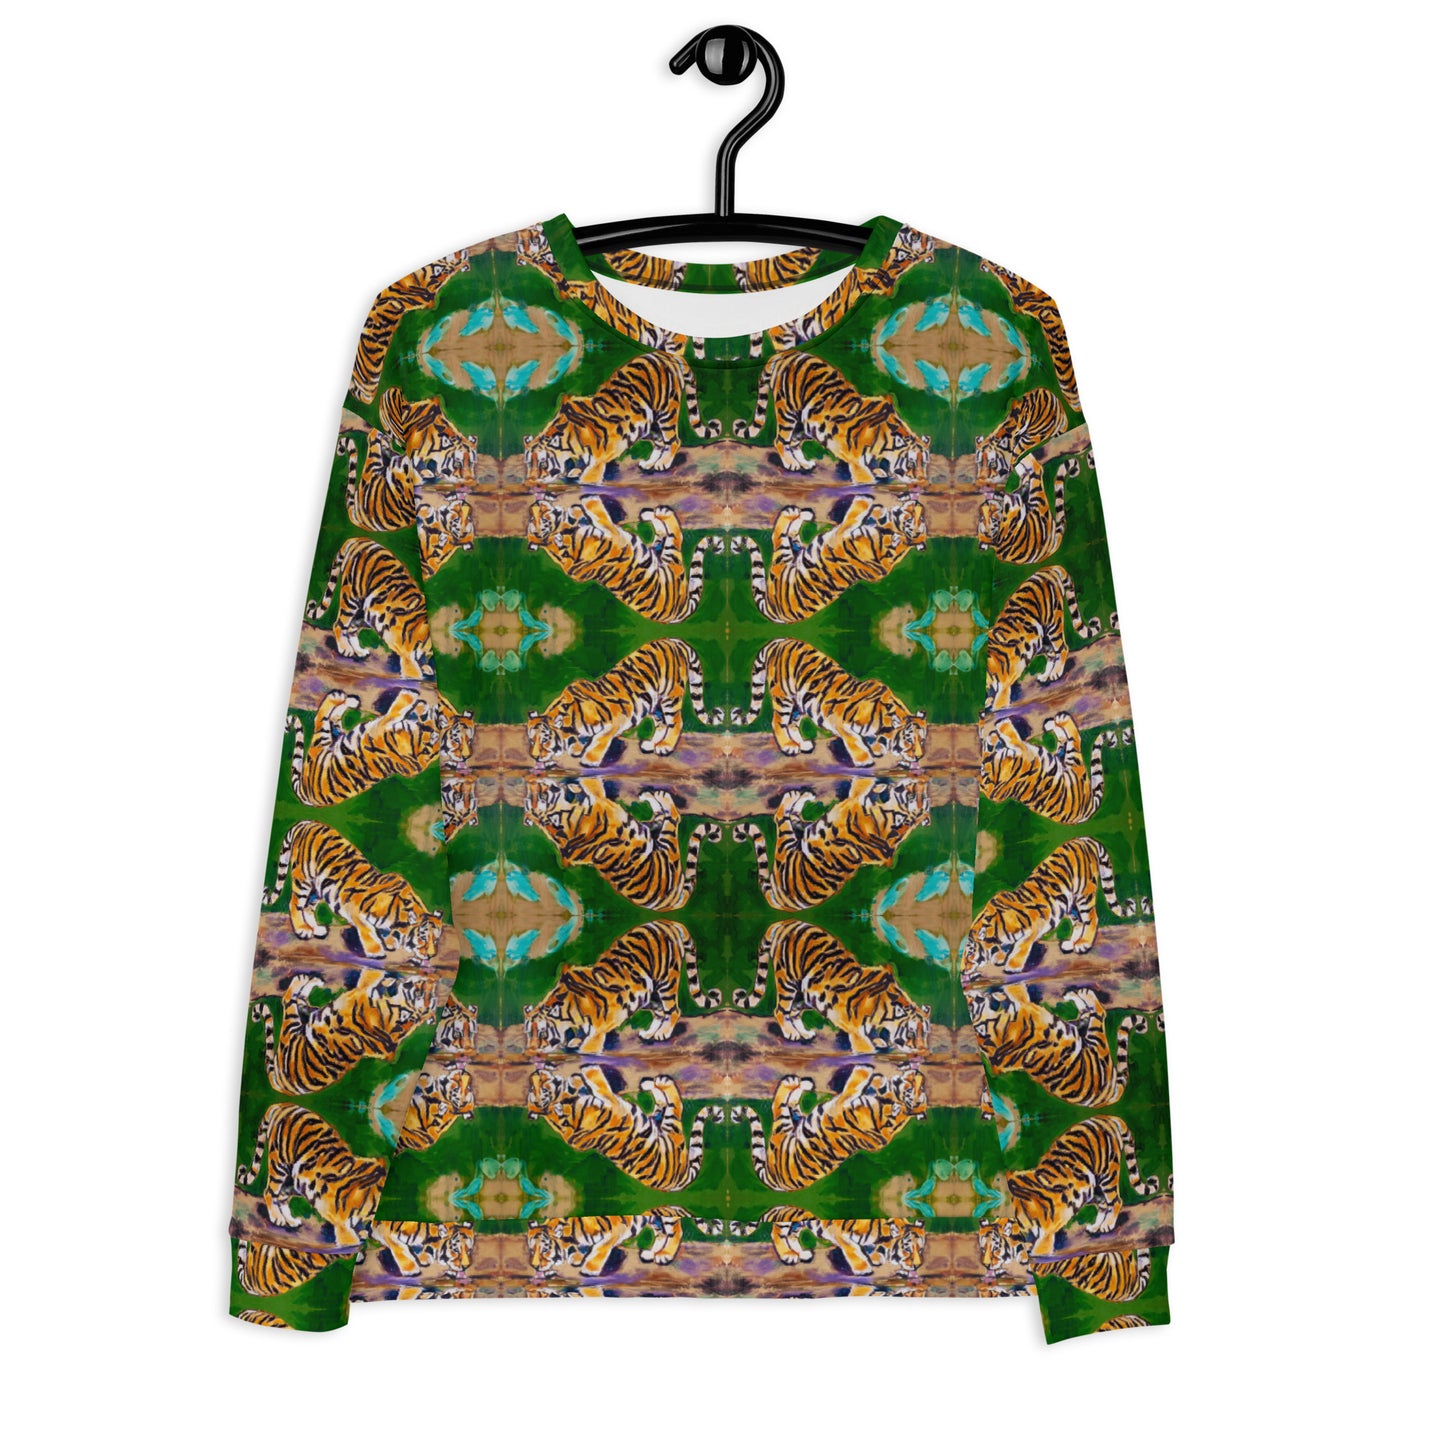 Tiger Reflections Pattern All Over Print Unisex Sweatshirt